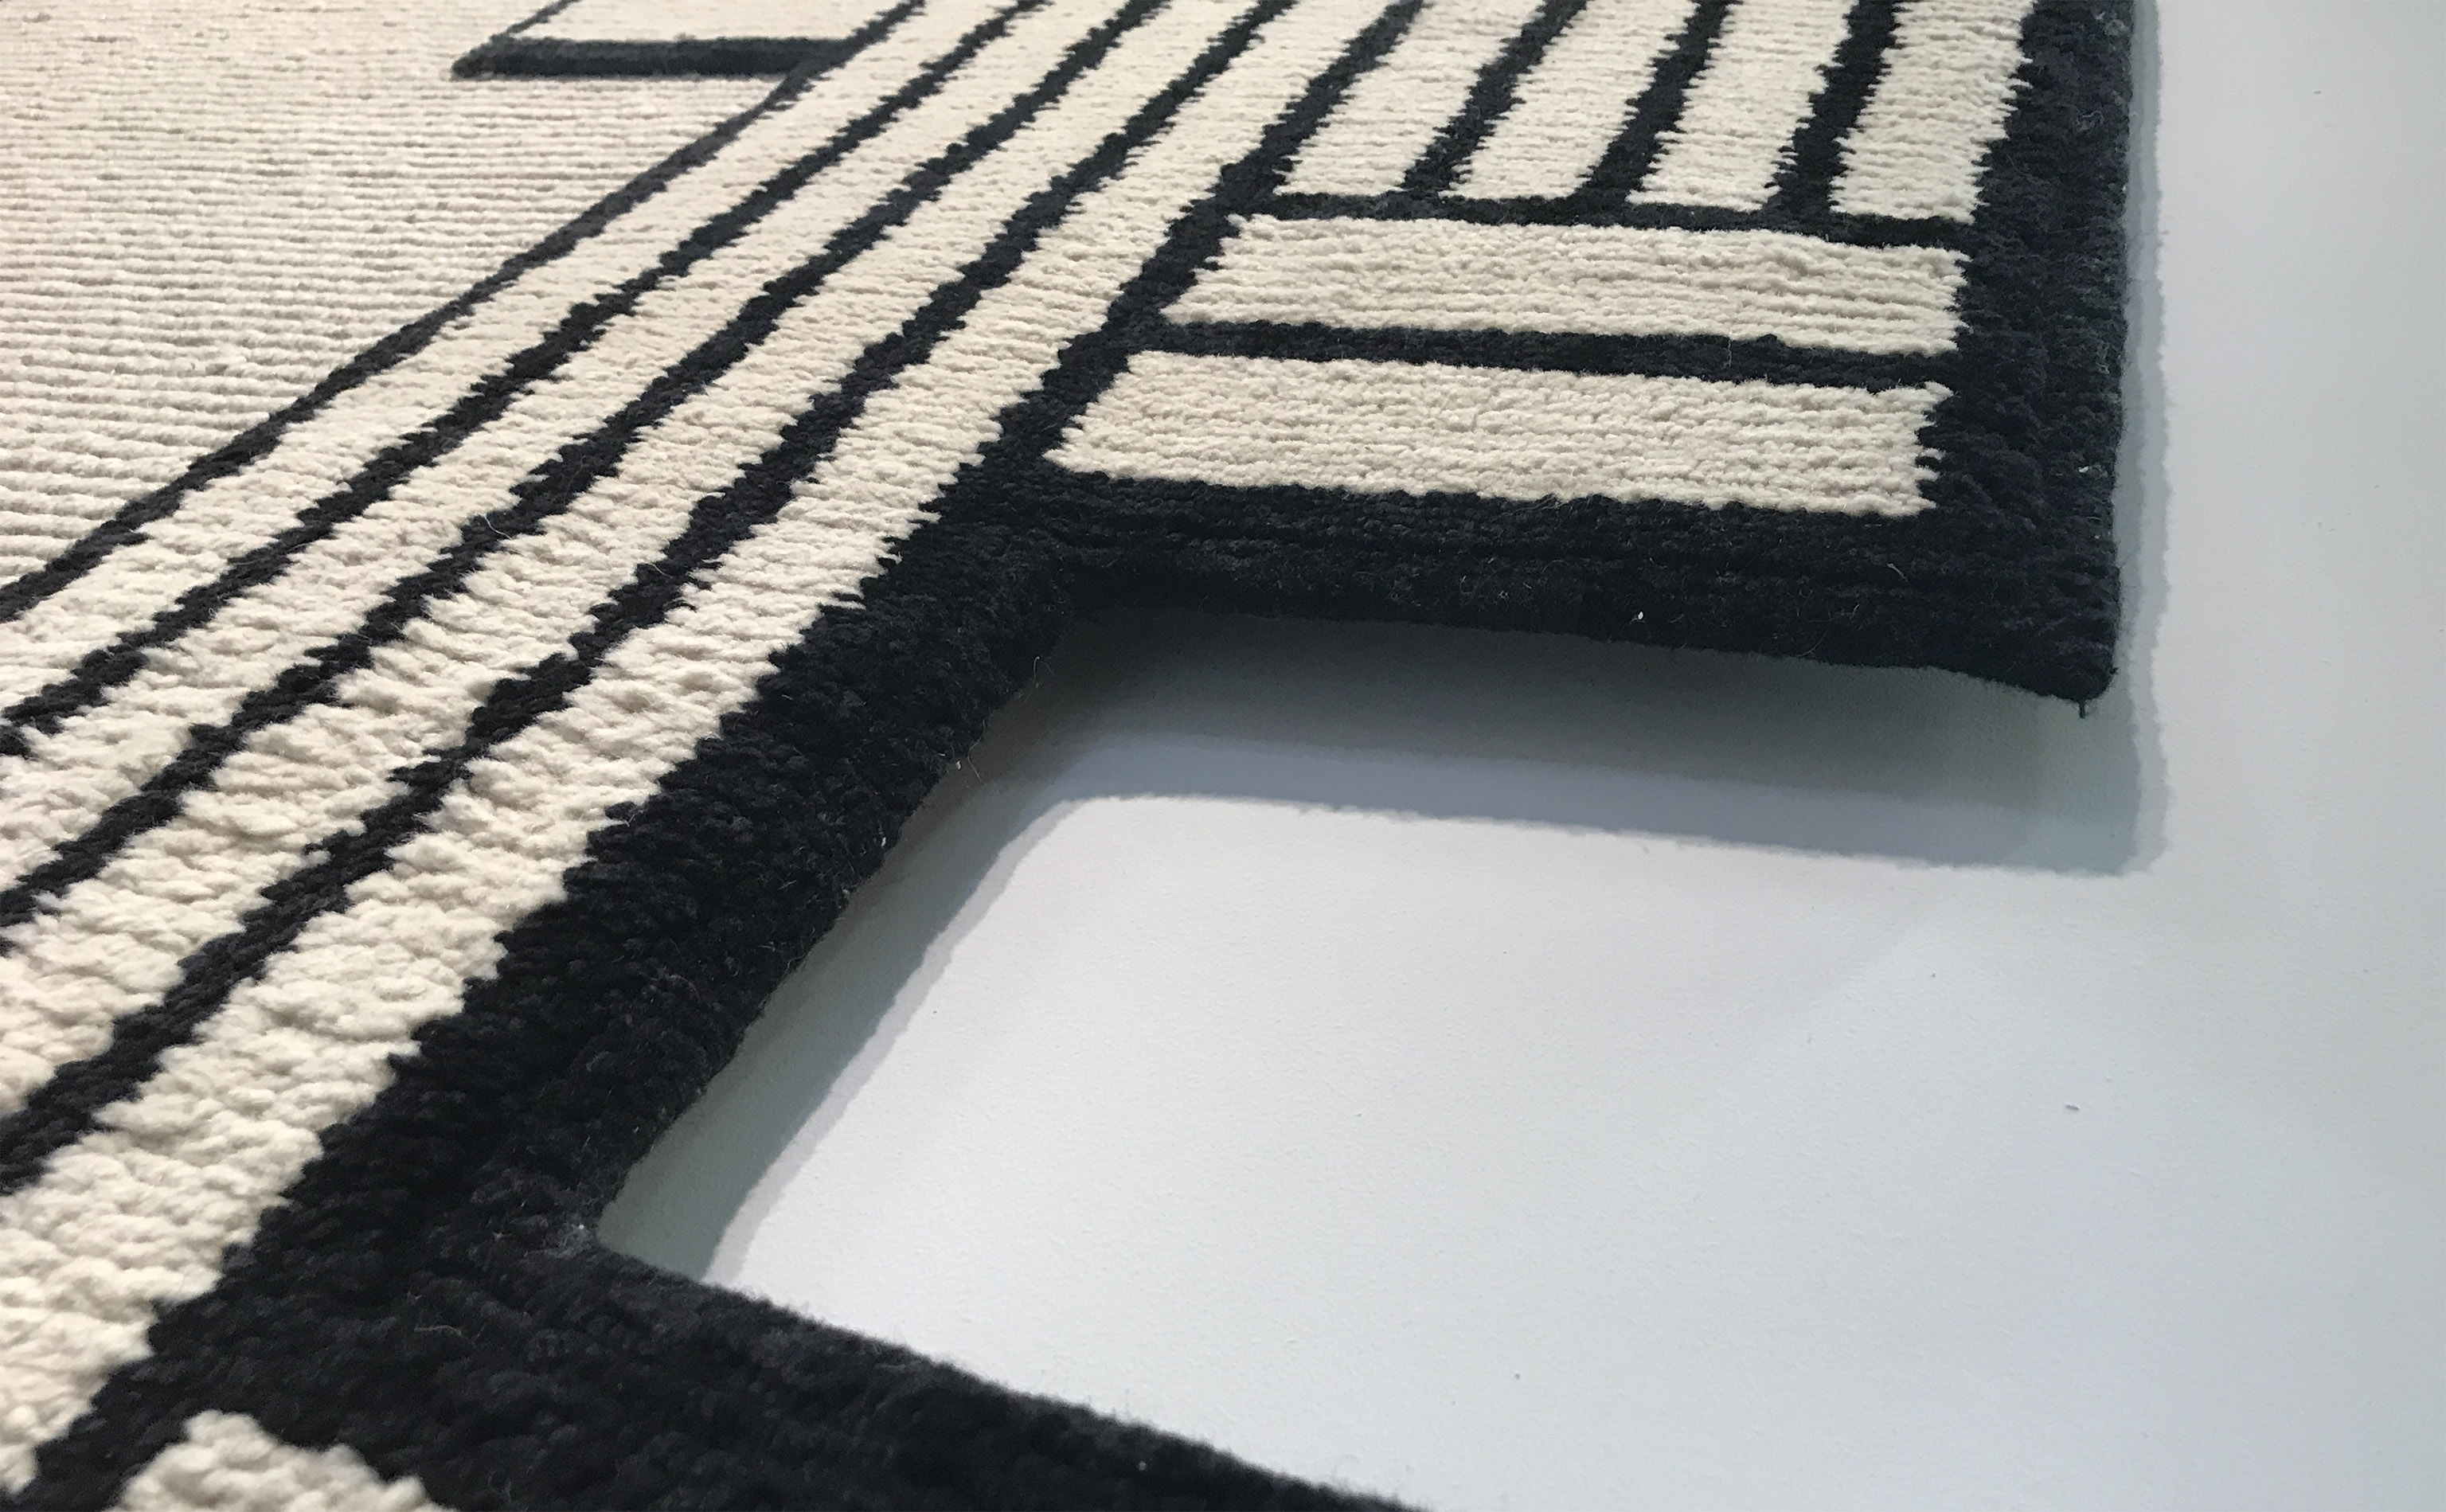 'Asmara' by Federico Pepe for cc-tapis, shown in detail, as seen during IMM Cologne. The design is named after the capital of Eritrea, much of which was built in the colonial Italian era just prior to World War II. It is considered a premier example of a modernist Art Deco city. | Image by The Ruggist.